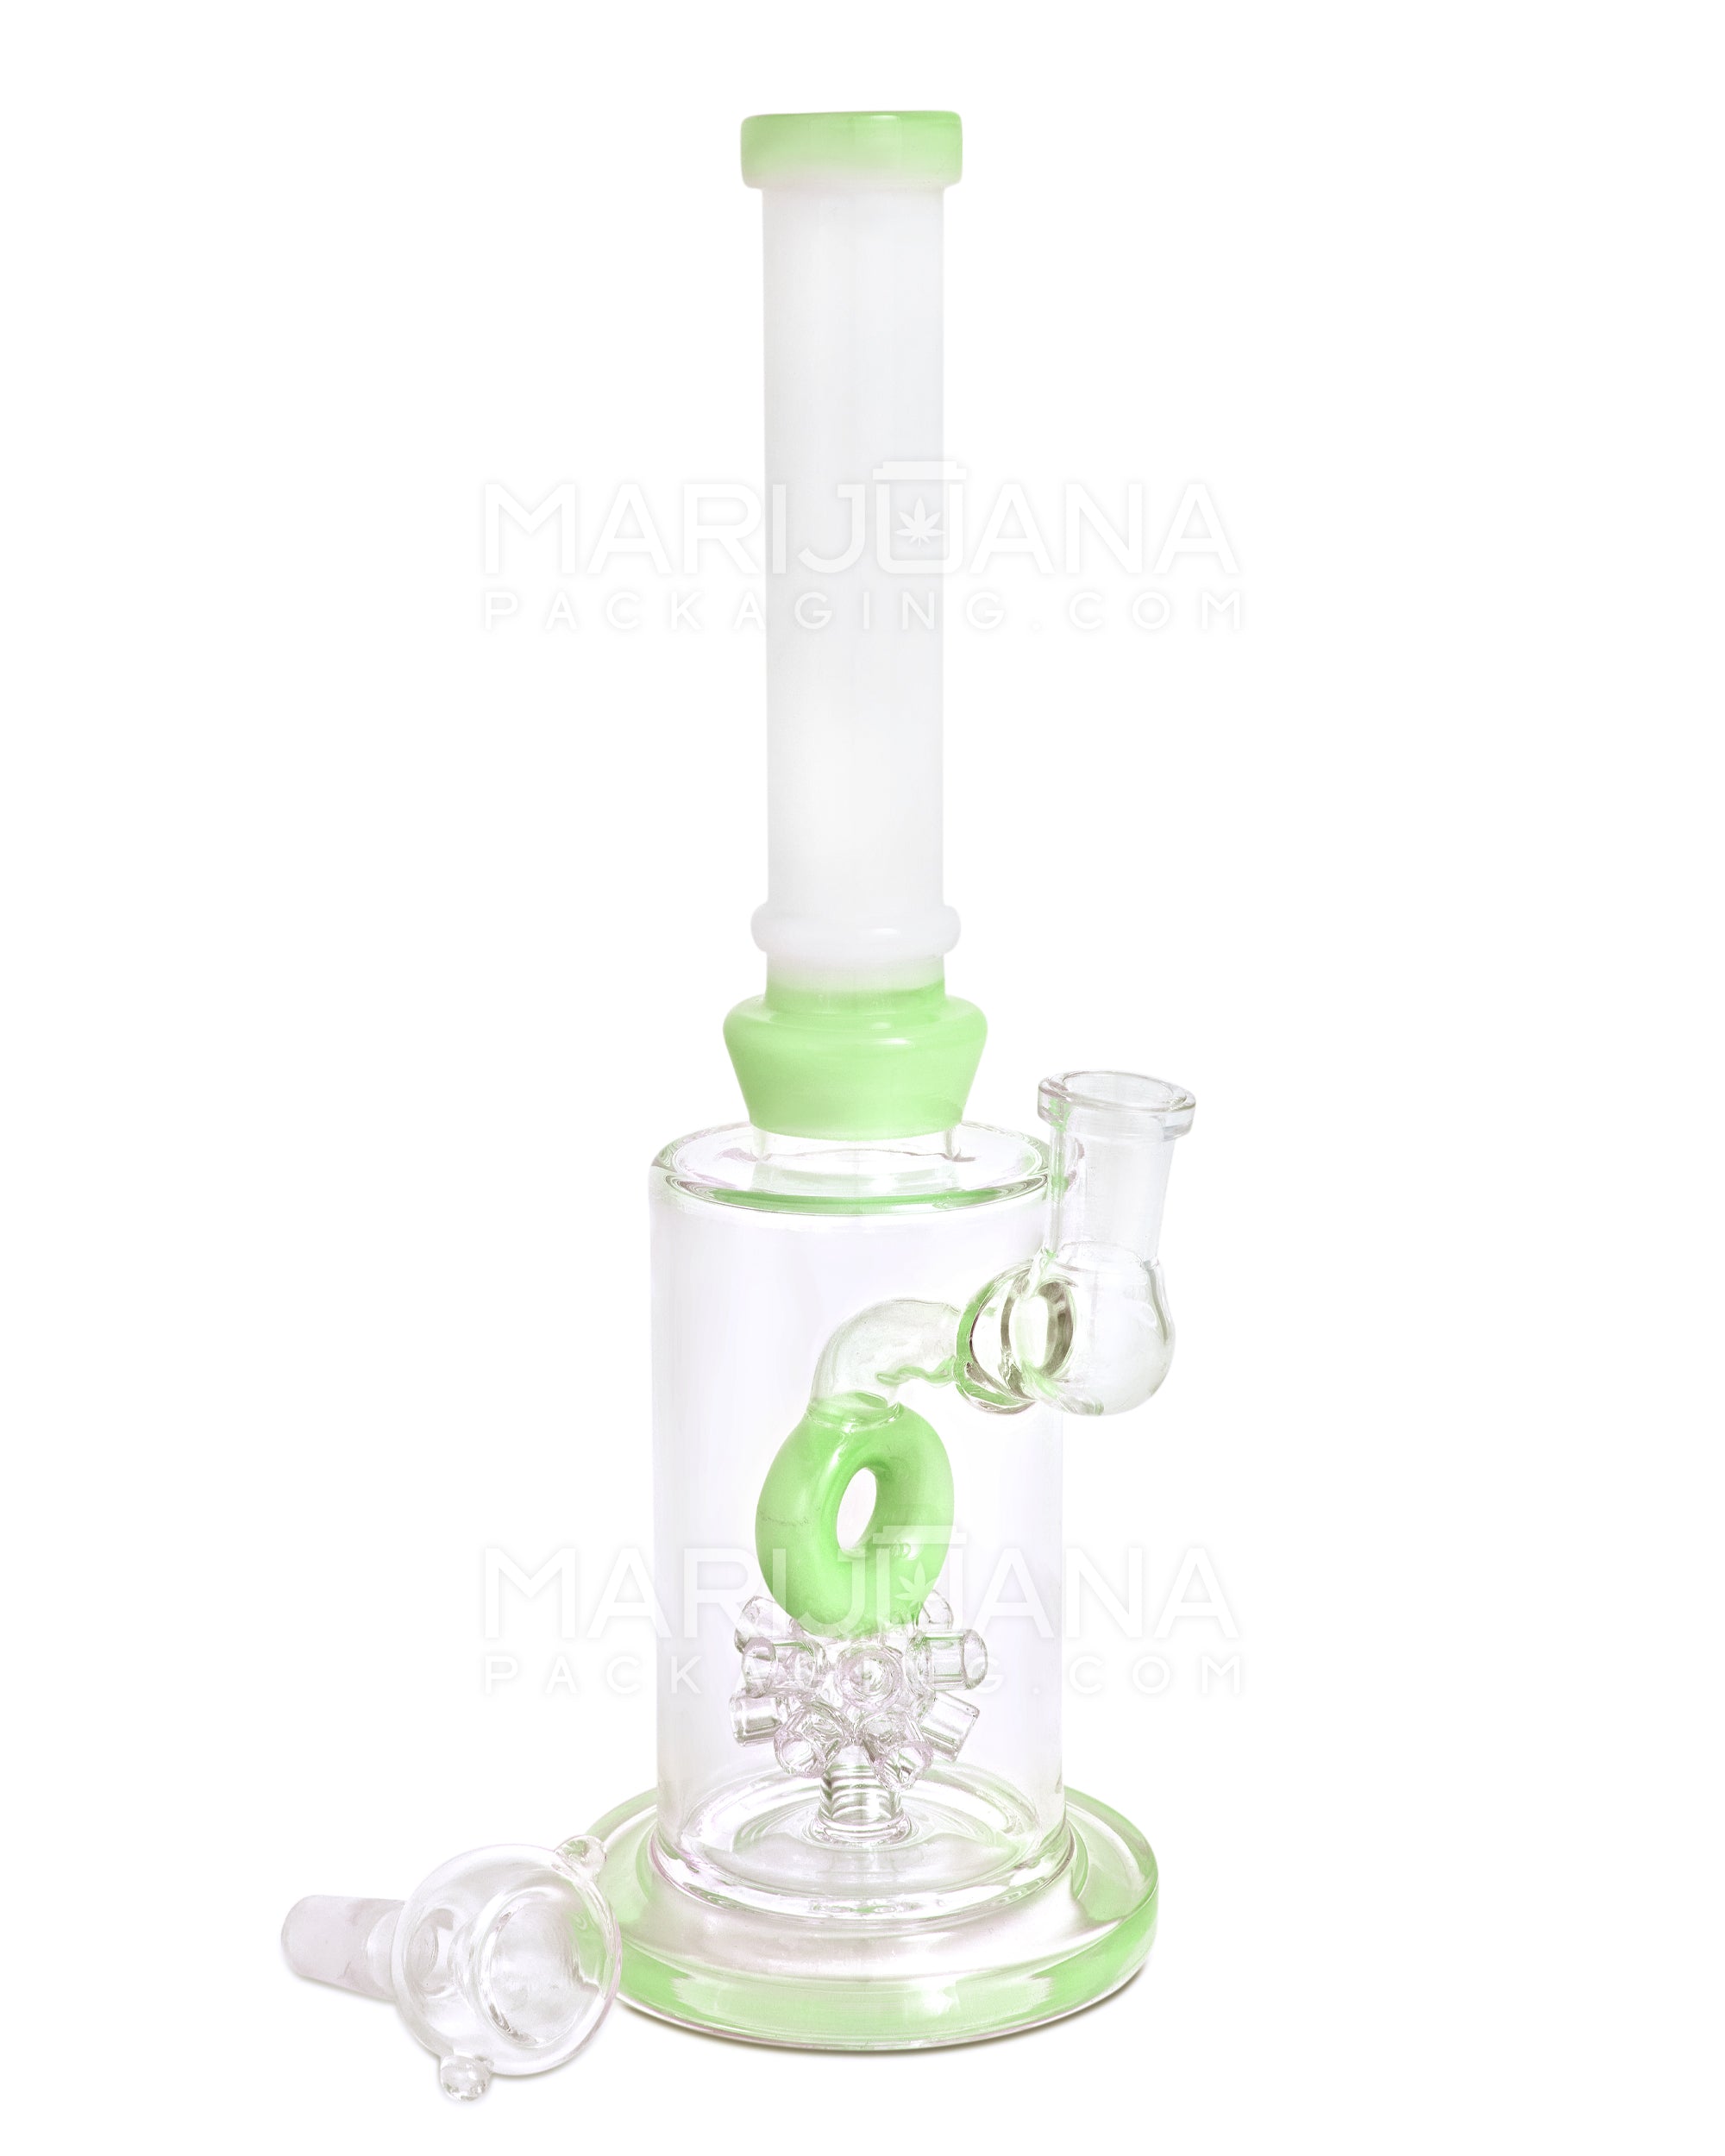 Straight Neck Atomic Donut Perc Glass Water Pipe w/ Thick Base | 10.5in Tall - 14mm Bowl - Slime - 2